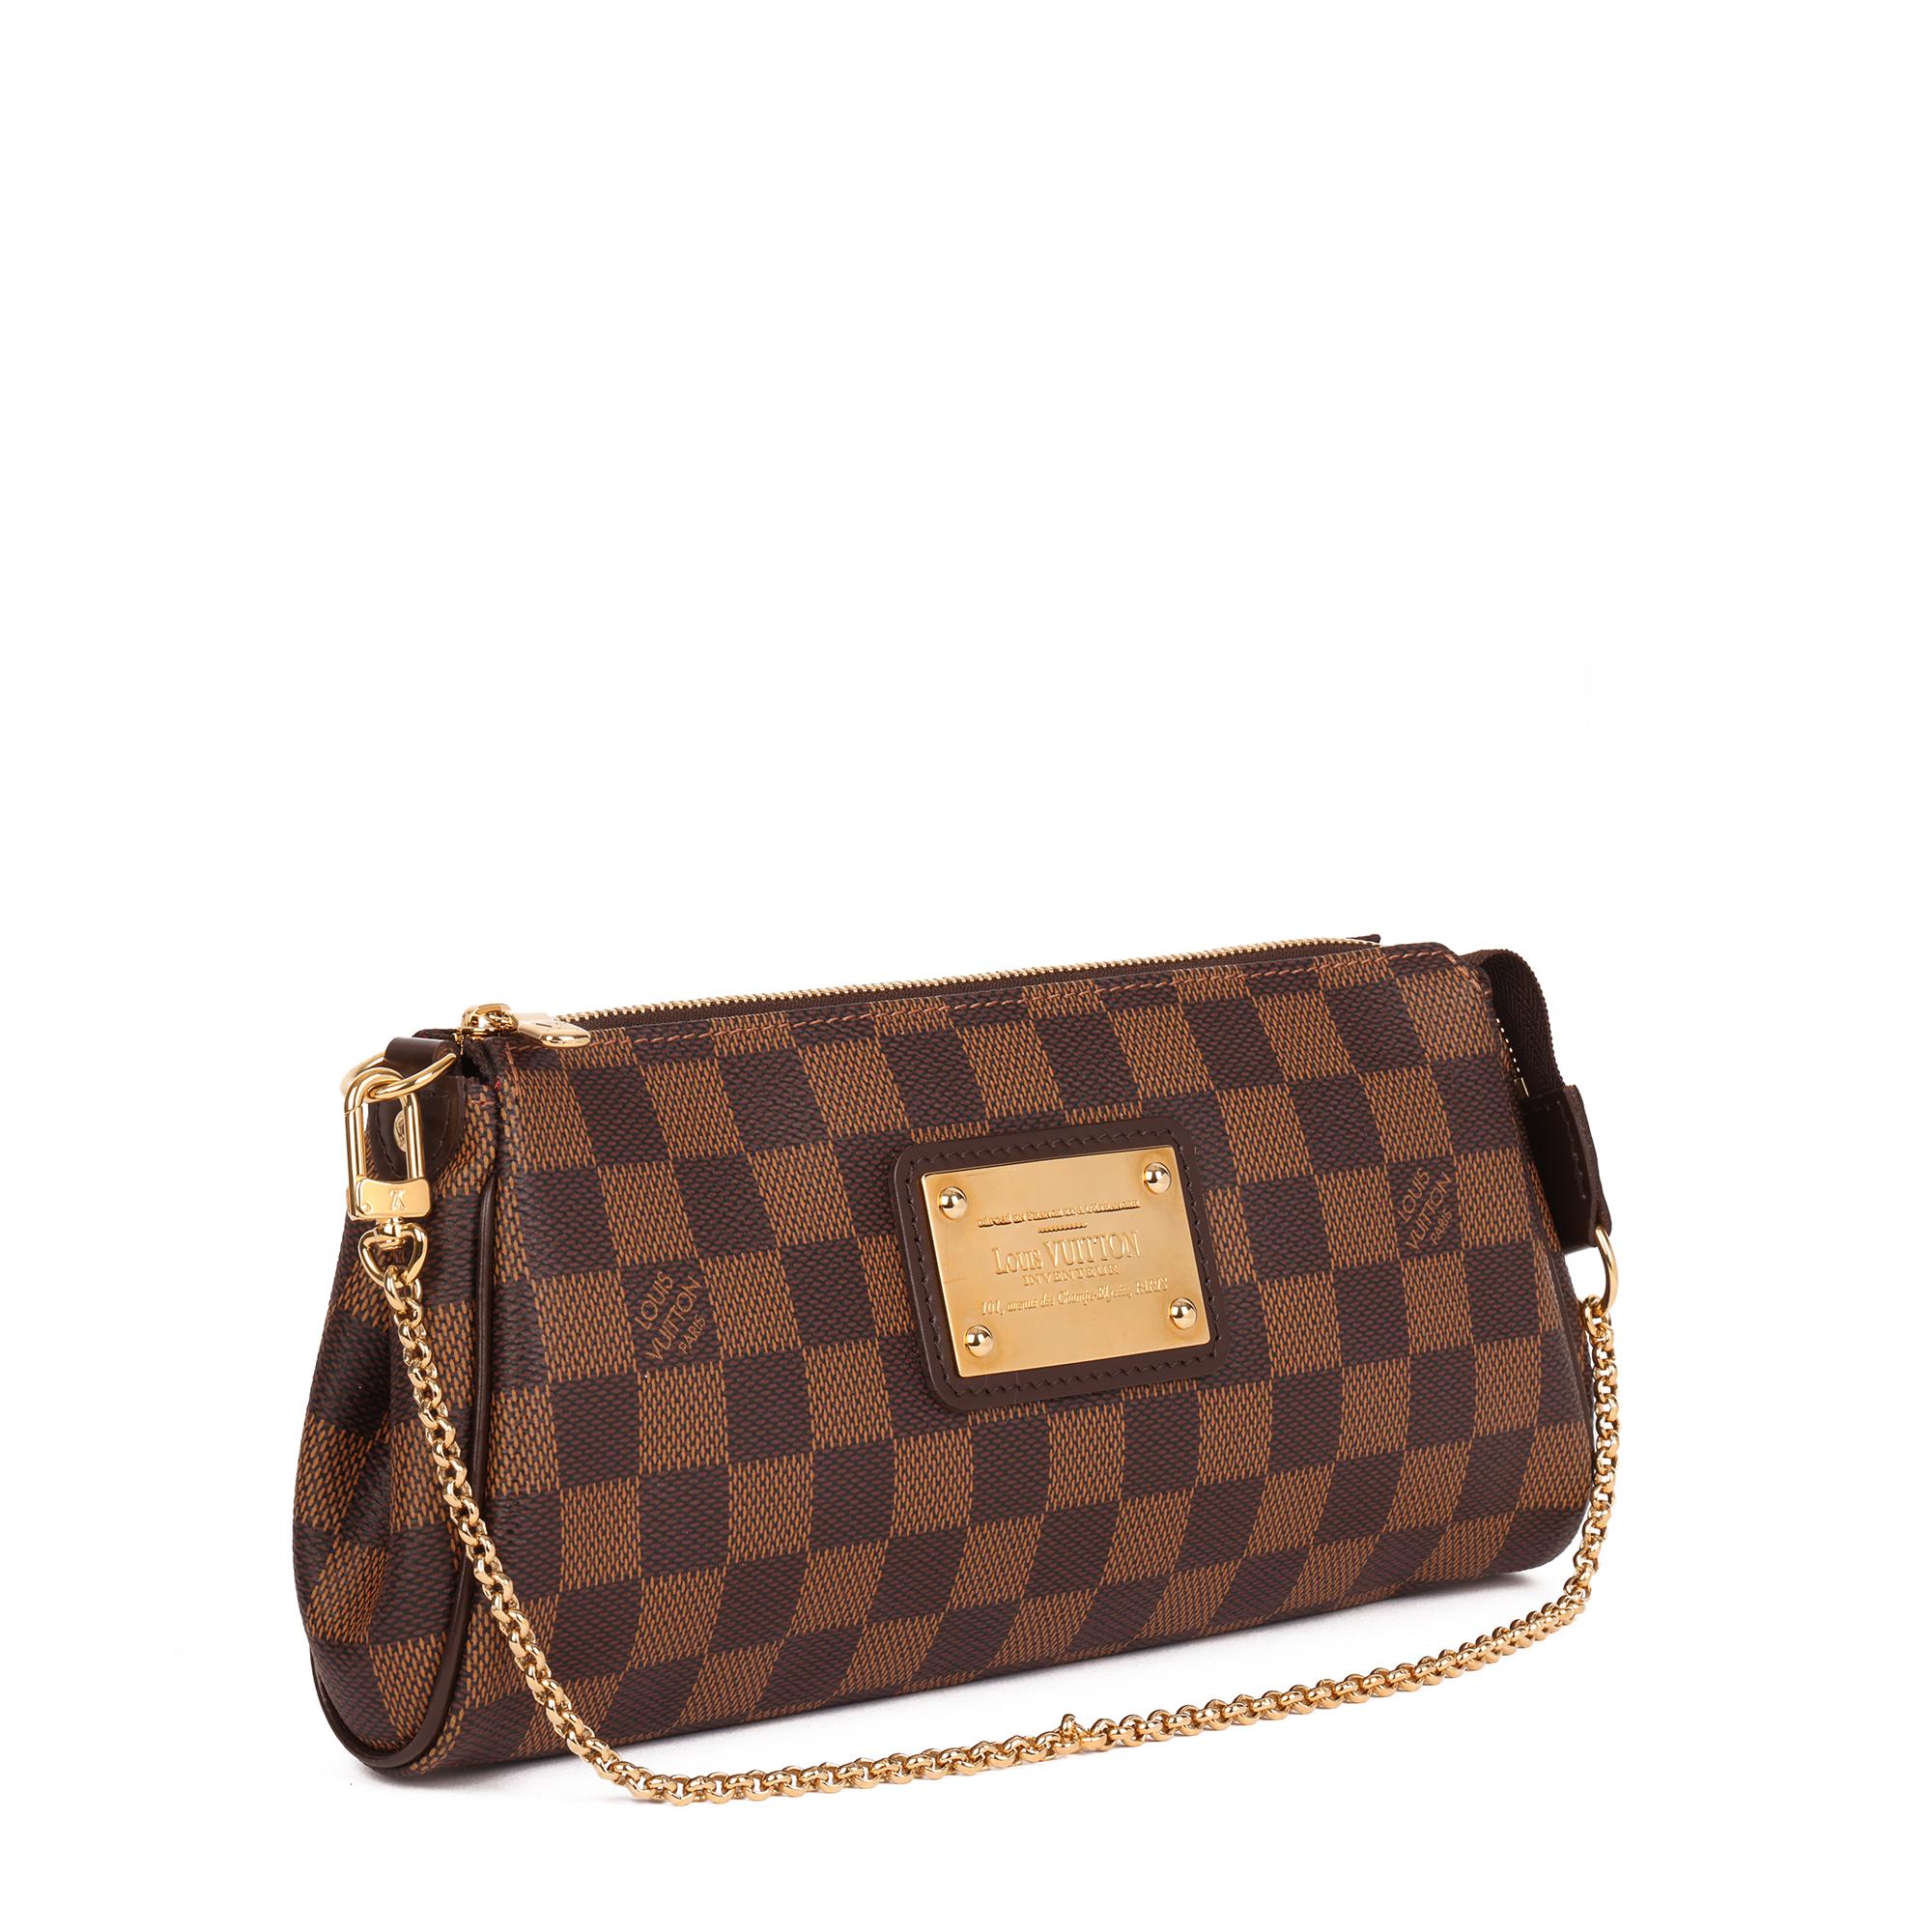 LOUIS VUITTON
Damier Ebene Coated Canvas & Calfskin Leather Eva

Xupes Reference: HB4098
Serial Number: DU5100
Age (Circa): 2010
Accompanied By: Louis Vuitton Dust Bag, Shoulder Strap, Chain Strap
Authenticity Details: Date Stamp (Made in